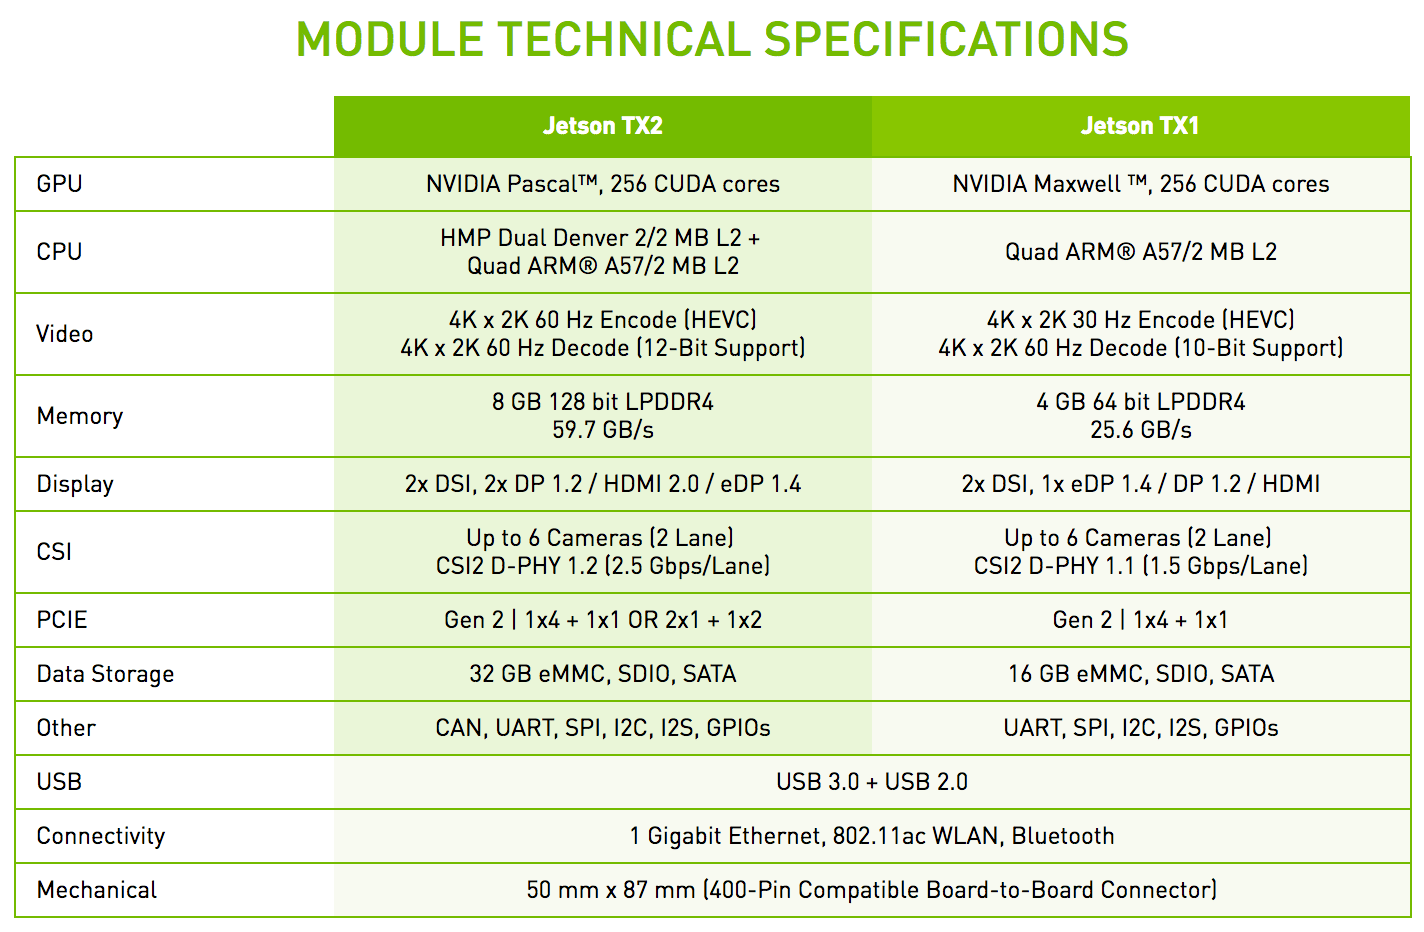 http://www.nvidia.com/object/embedded-systems-dev-kits-modules.html